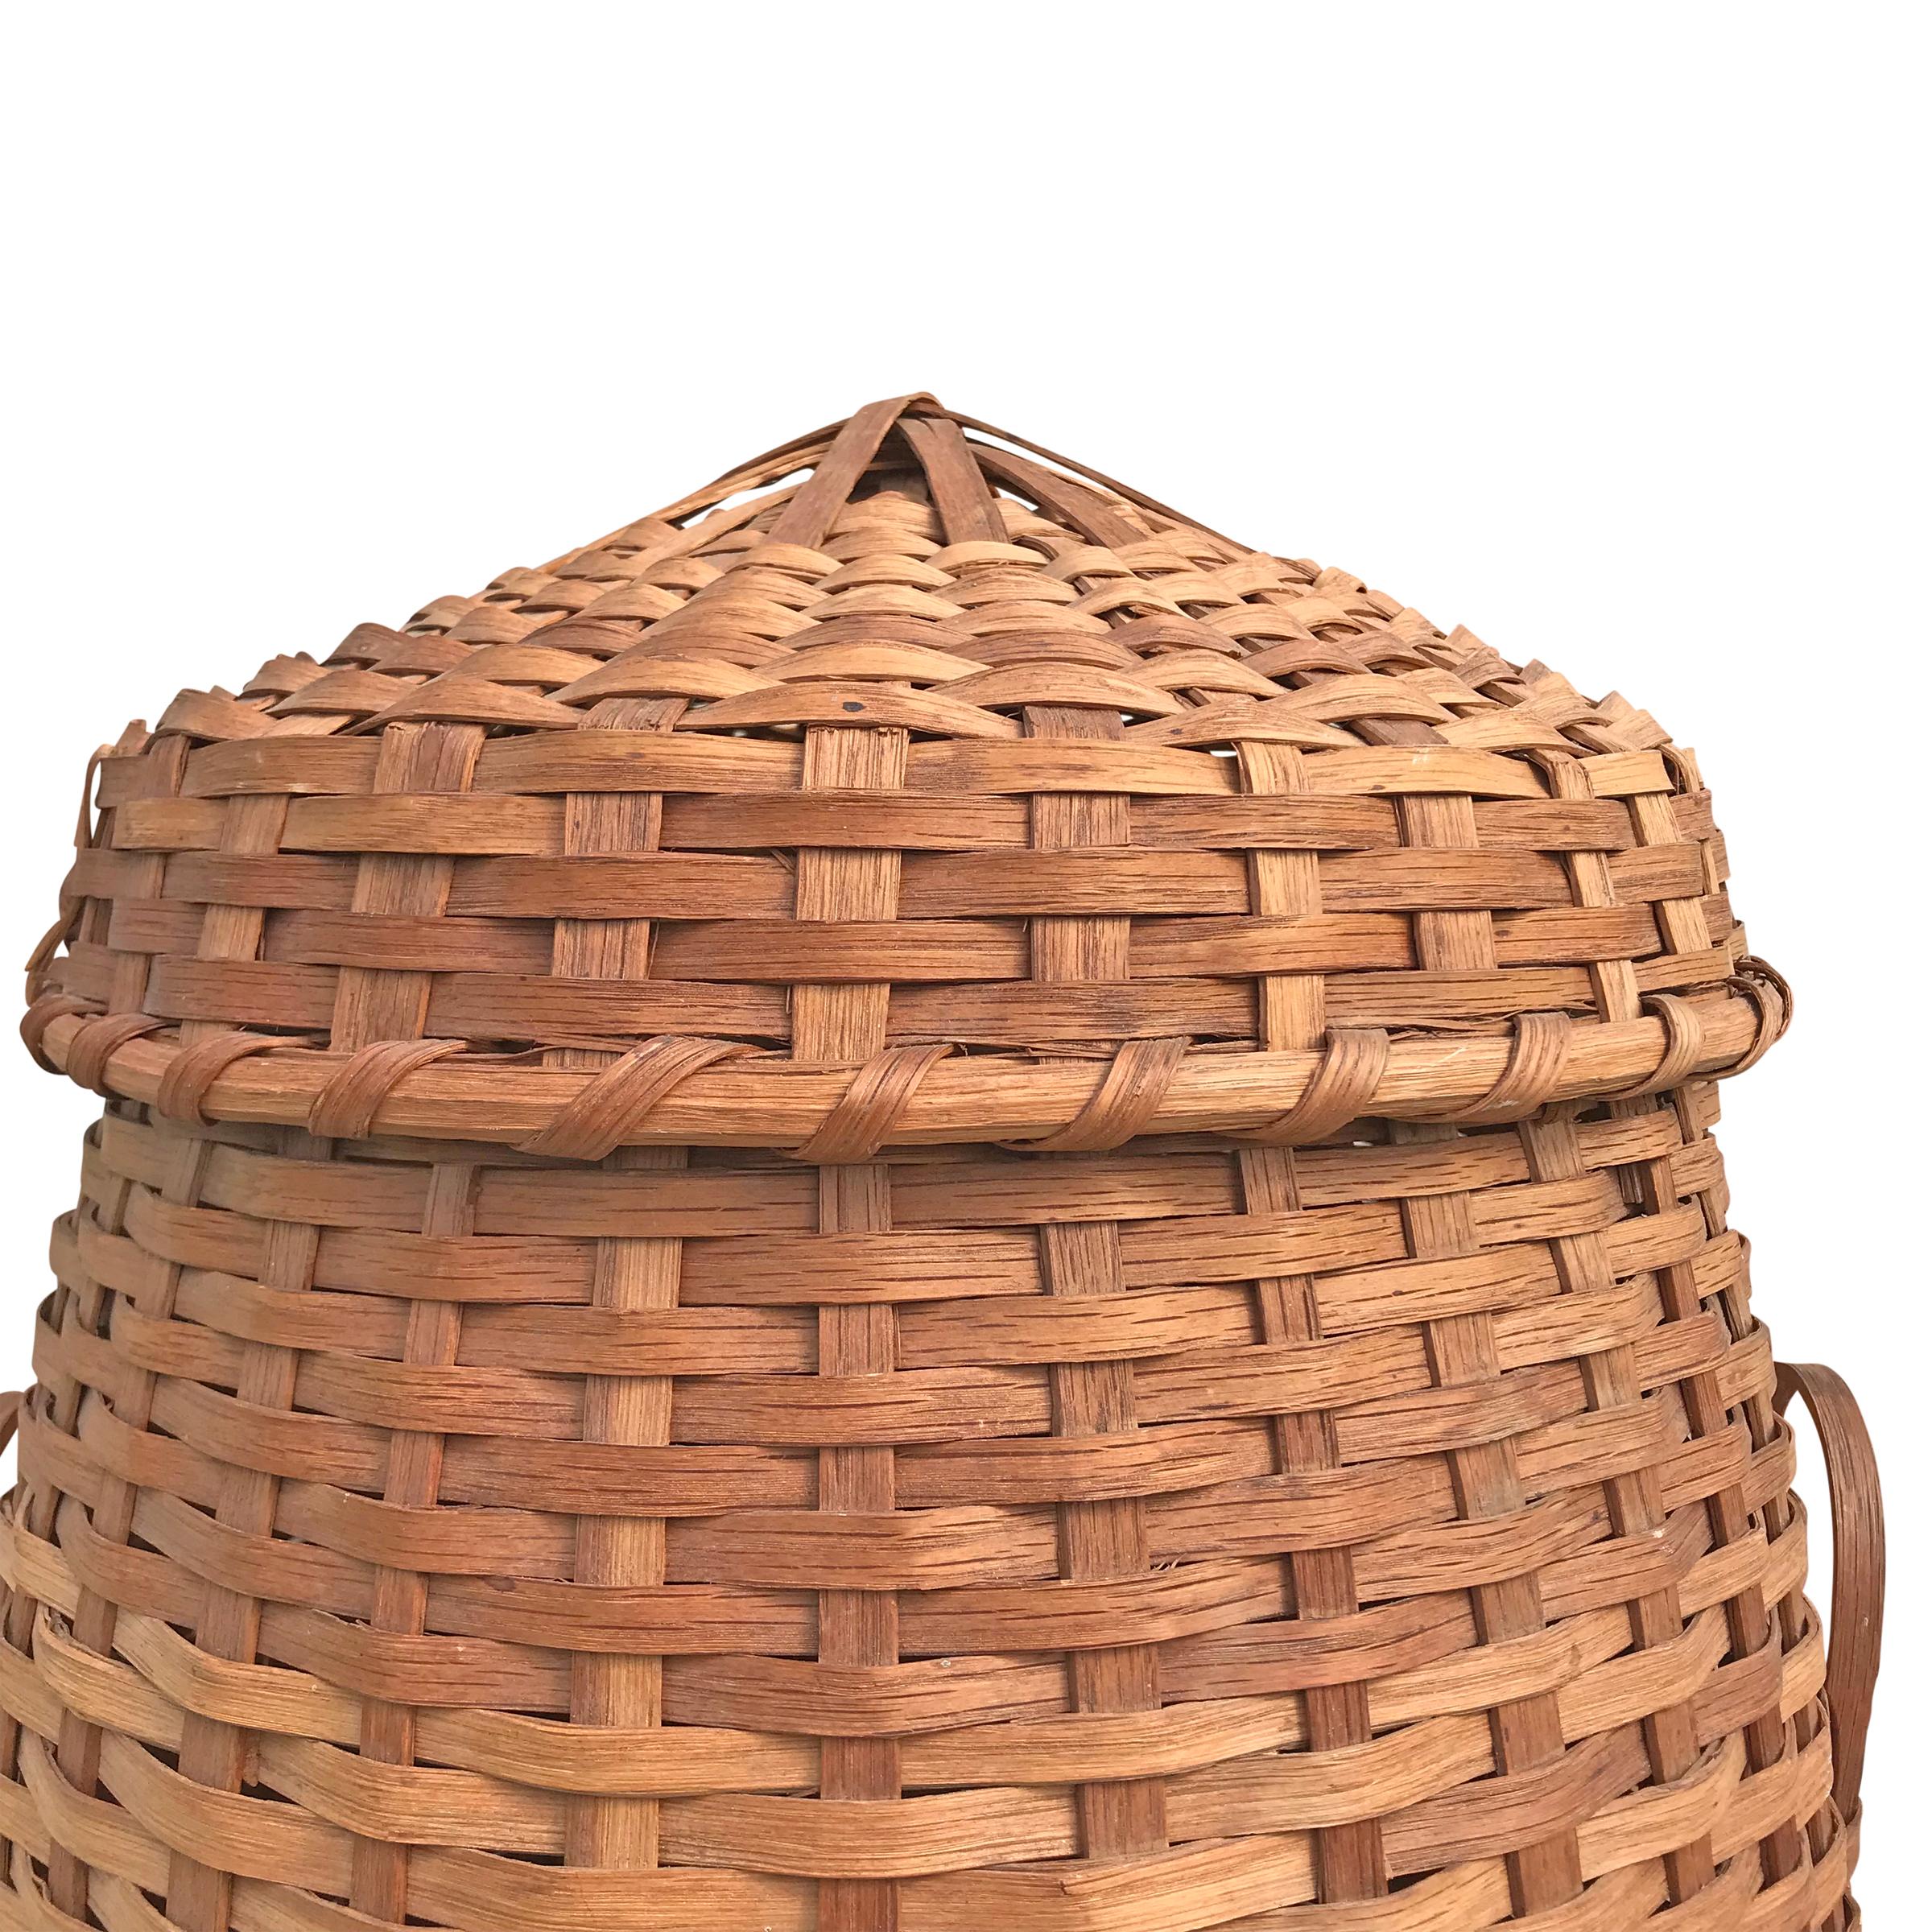 An incredible early 20th century American handwoven oak split feather basket with bent oak handles and a tightly fitted lid. Every farmer knows that nothing is wasted, not even feathers! Feather baskets were used on American farms to store feathers